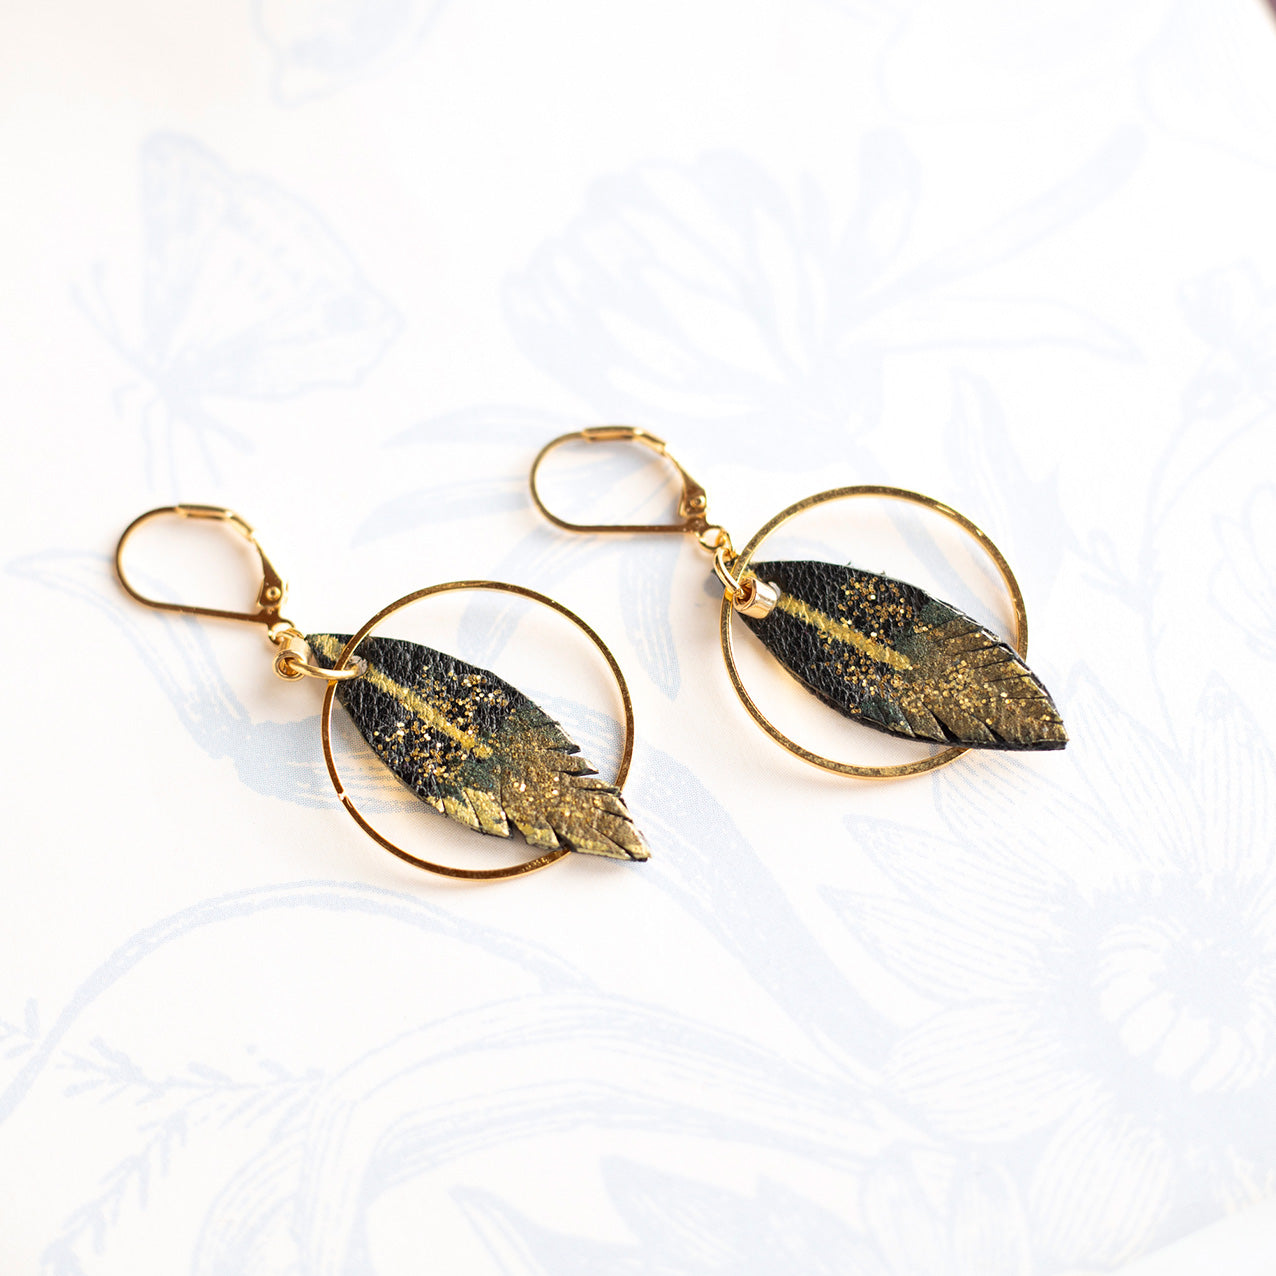 Feather hoop earrings in black and gold leather